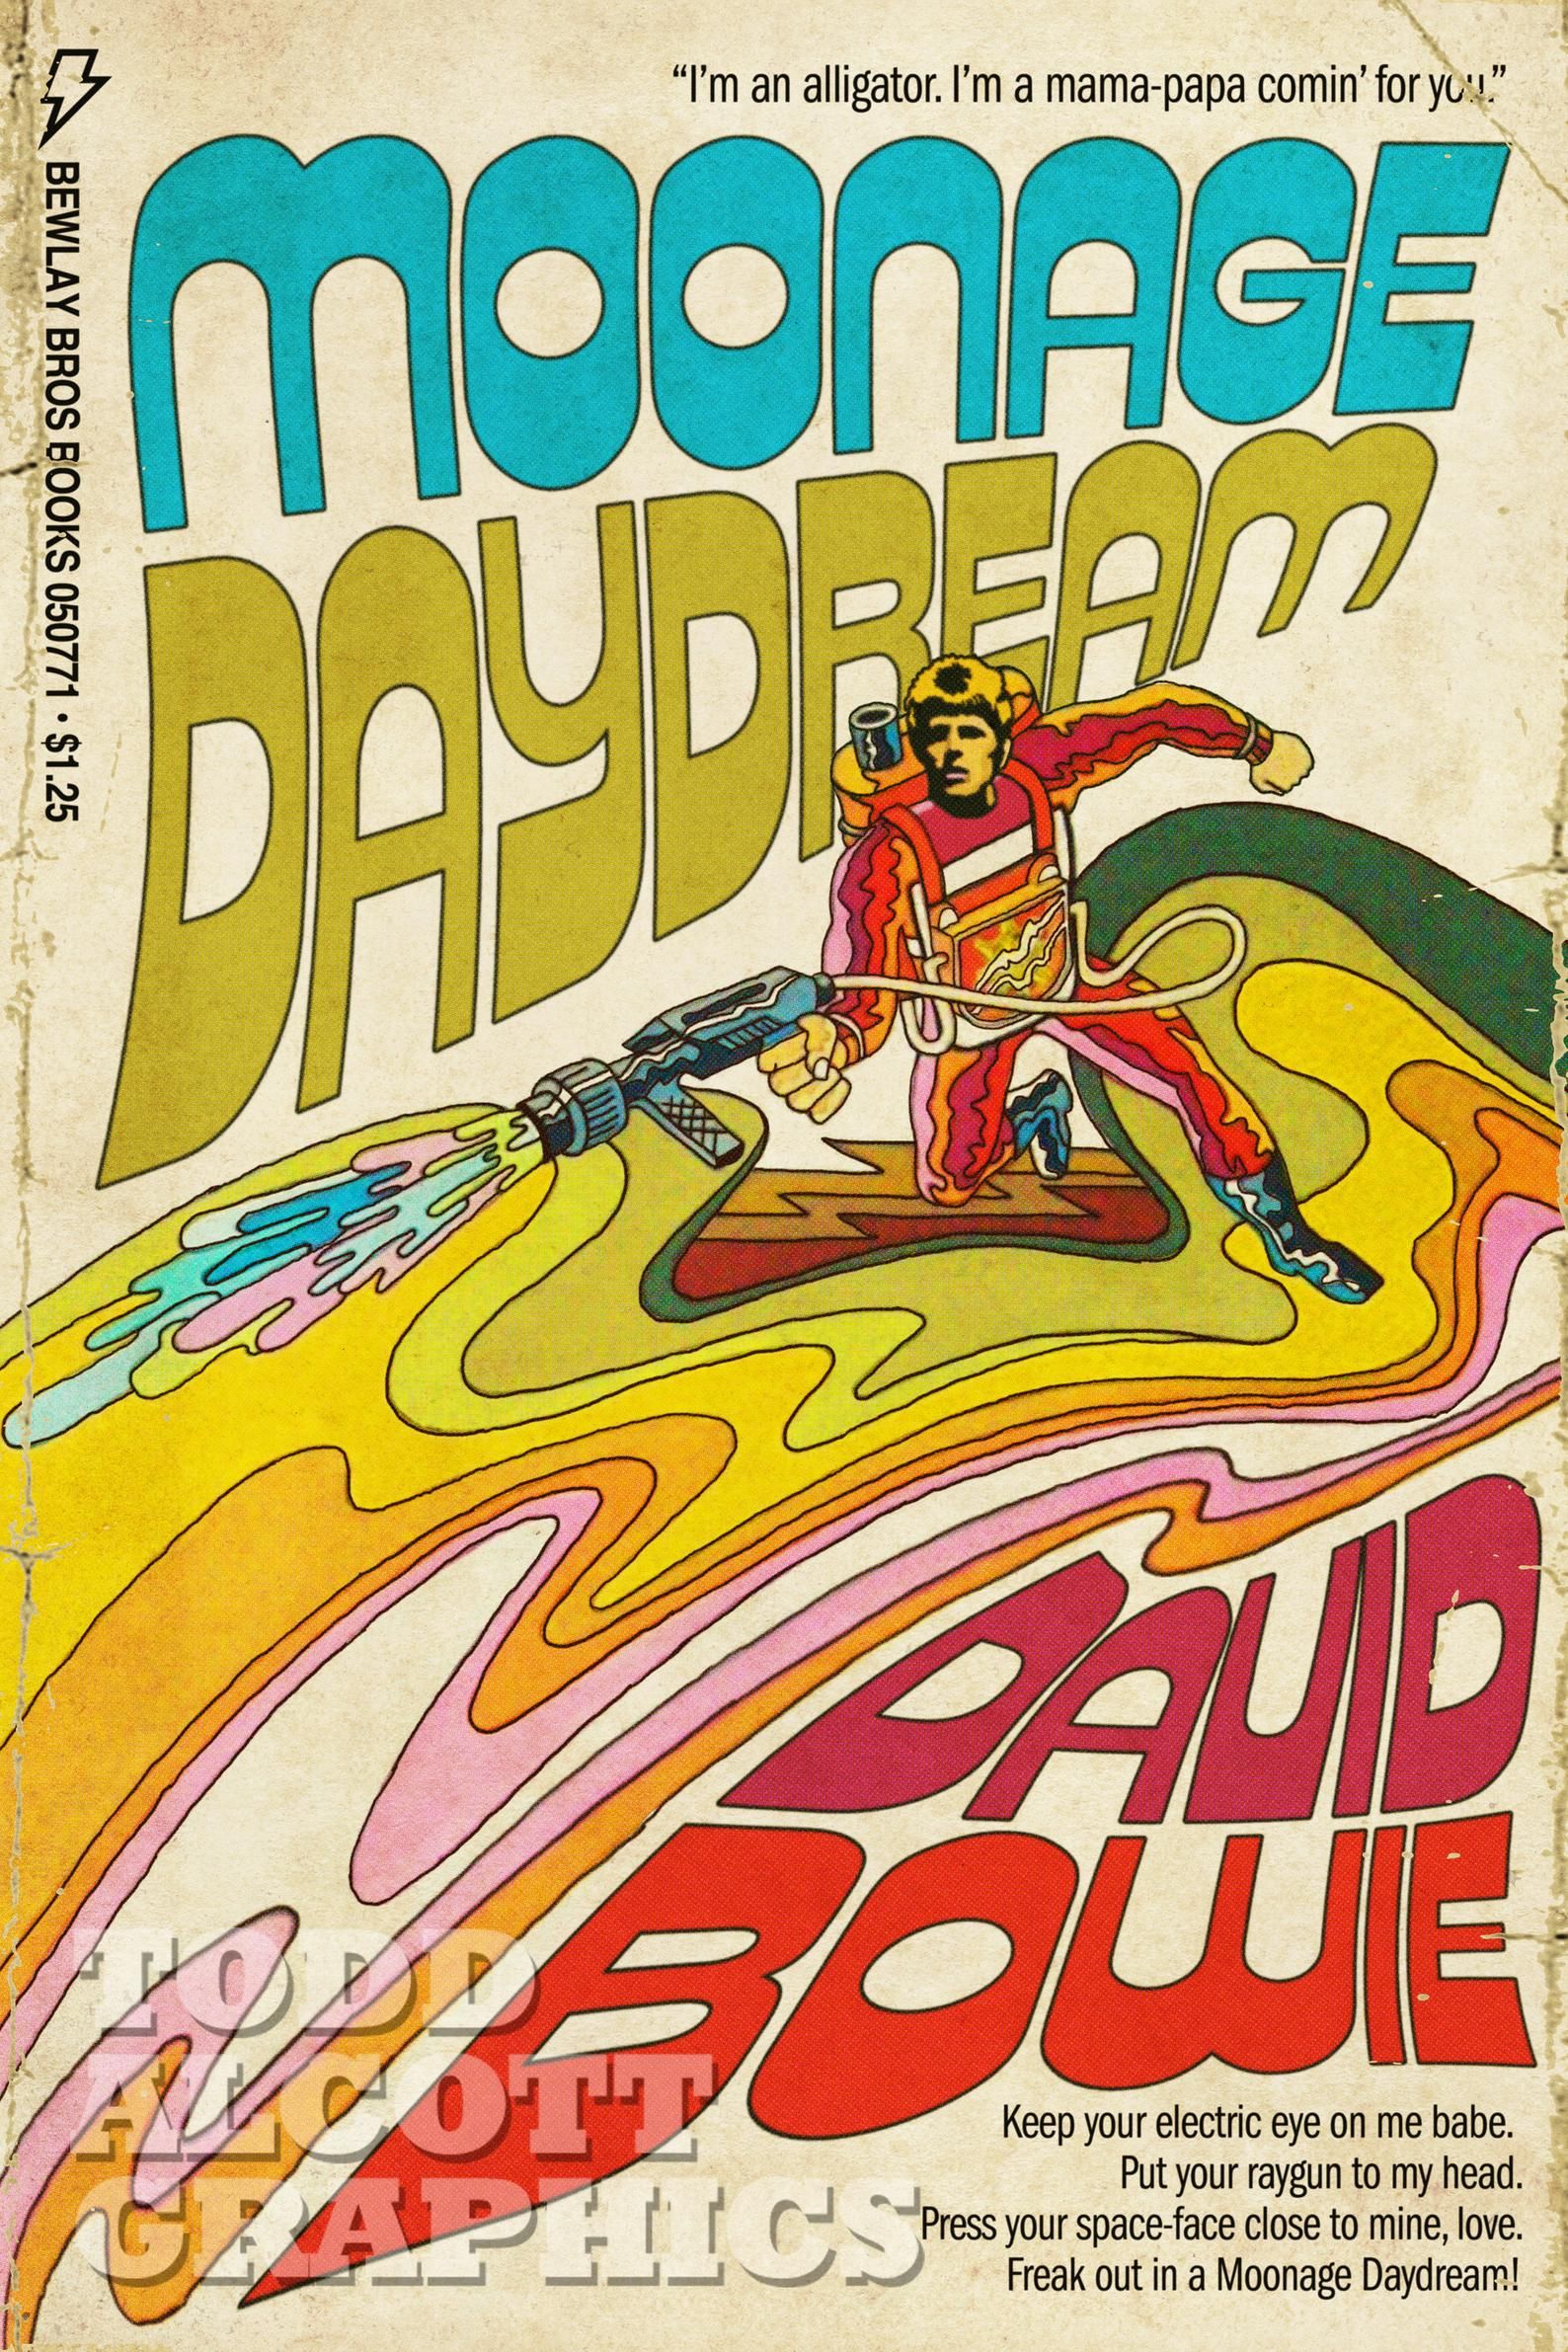 David Bowie Moonage Daydream 1970s Sci Fi Novel. Moonage Daydream, David Bowie Moonage Daydream, David Bowie Poster